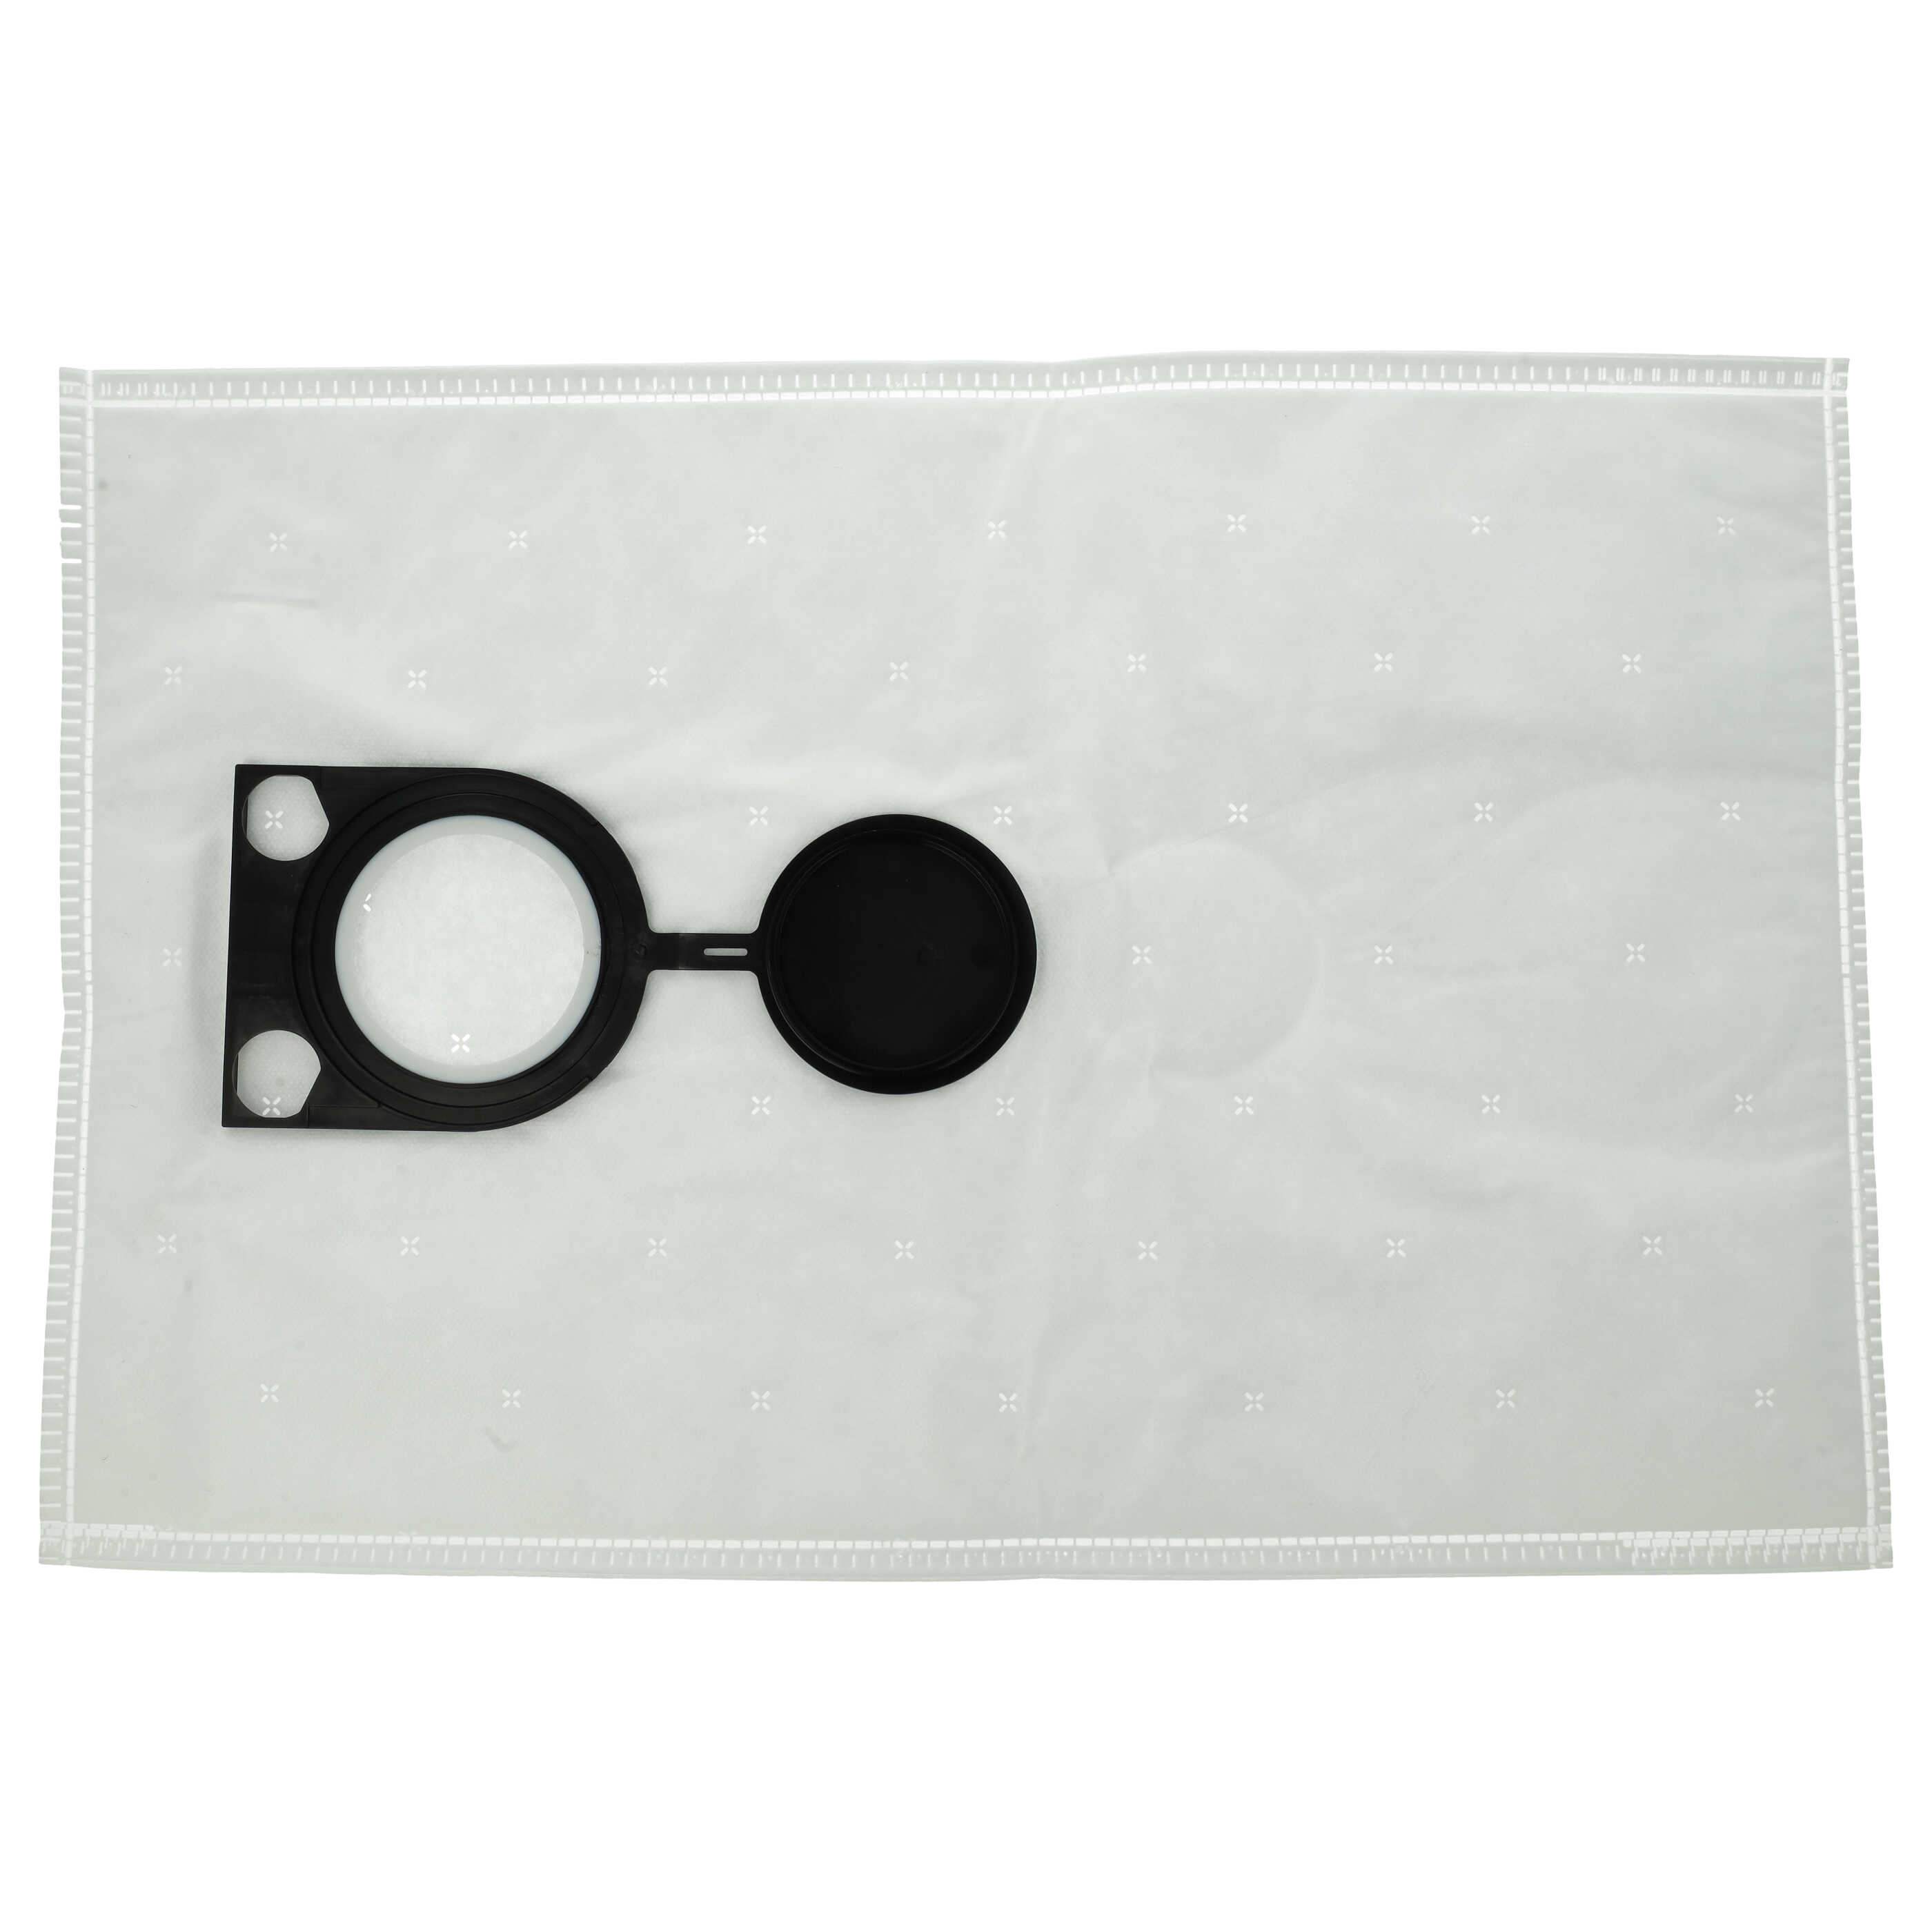 5x Vacuum Cleaner Bag replaces Bosch 2607432037 for Bosch - microfleece